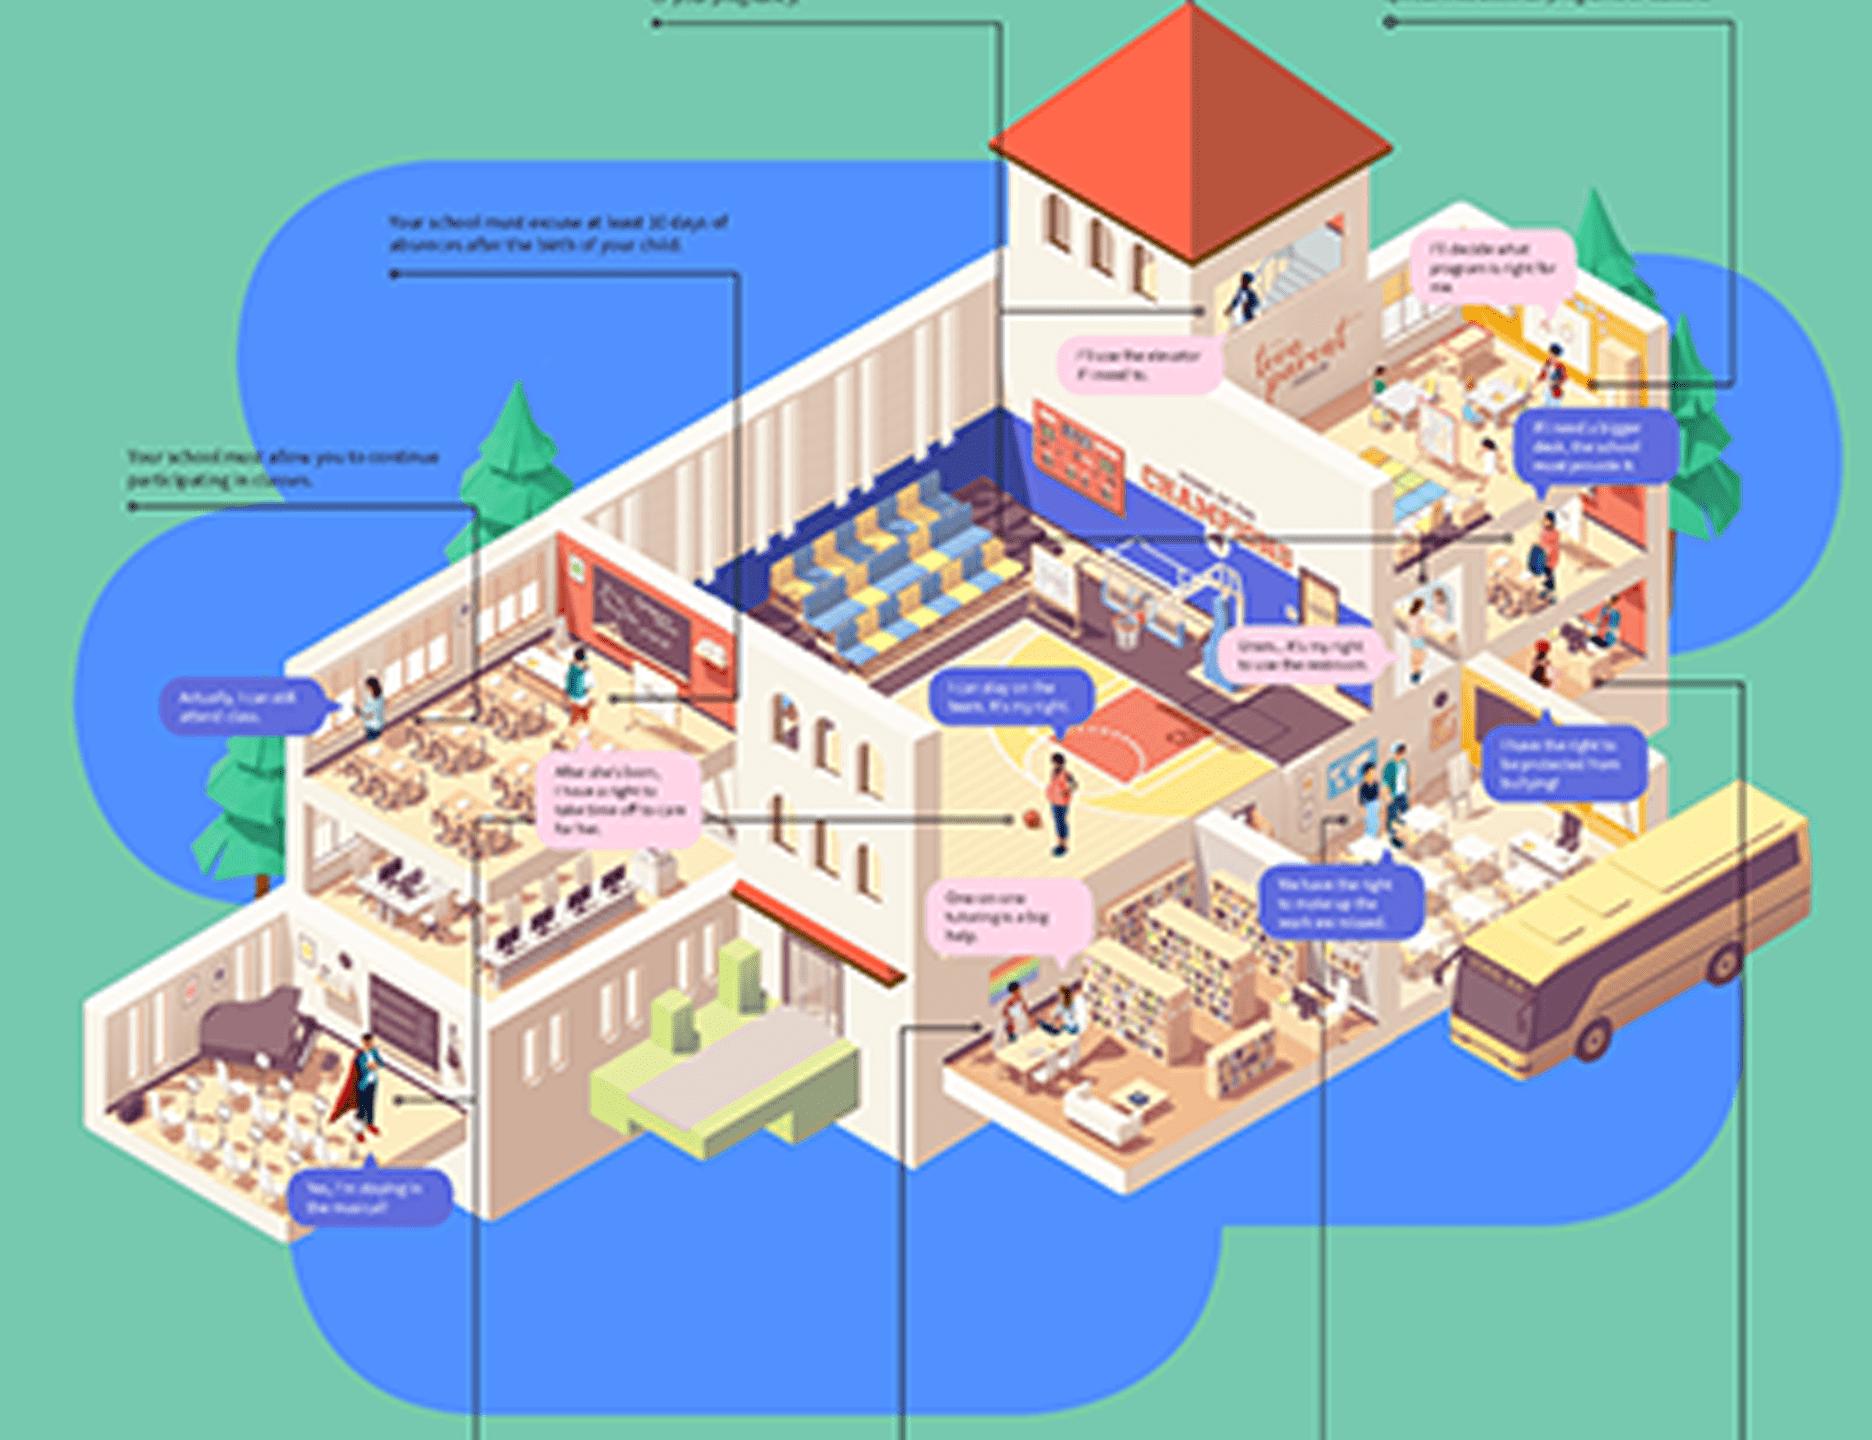 Image is a snapshot of the infographic, depicting cross-section graphic of a school, with various rooms and students and teachers